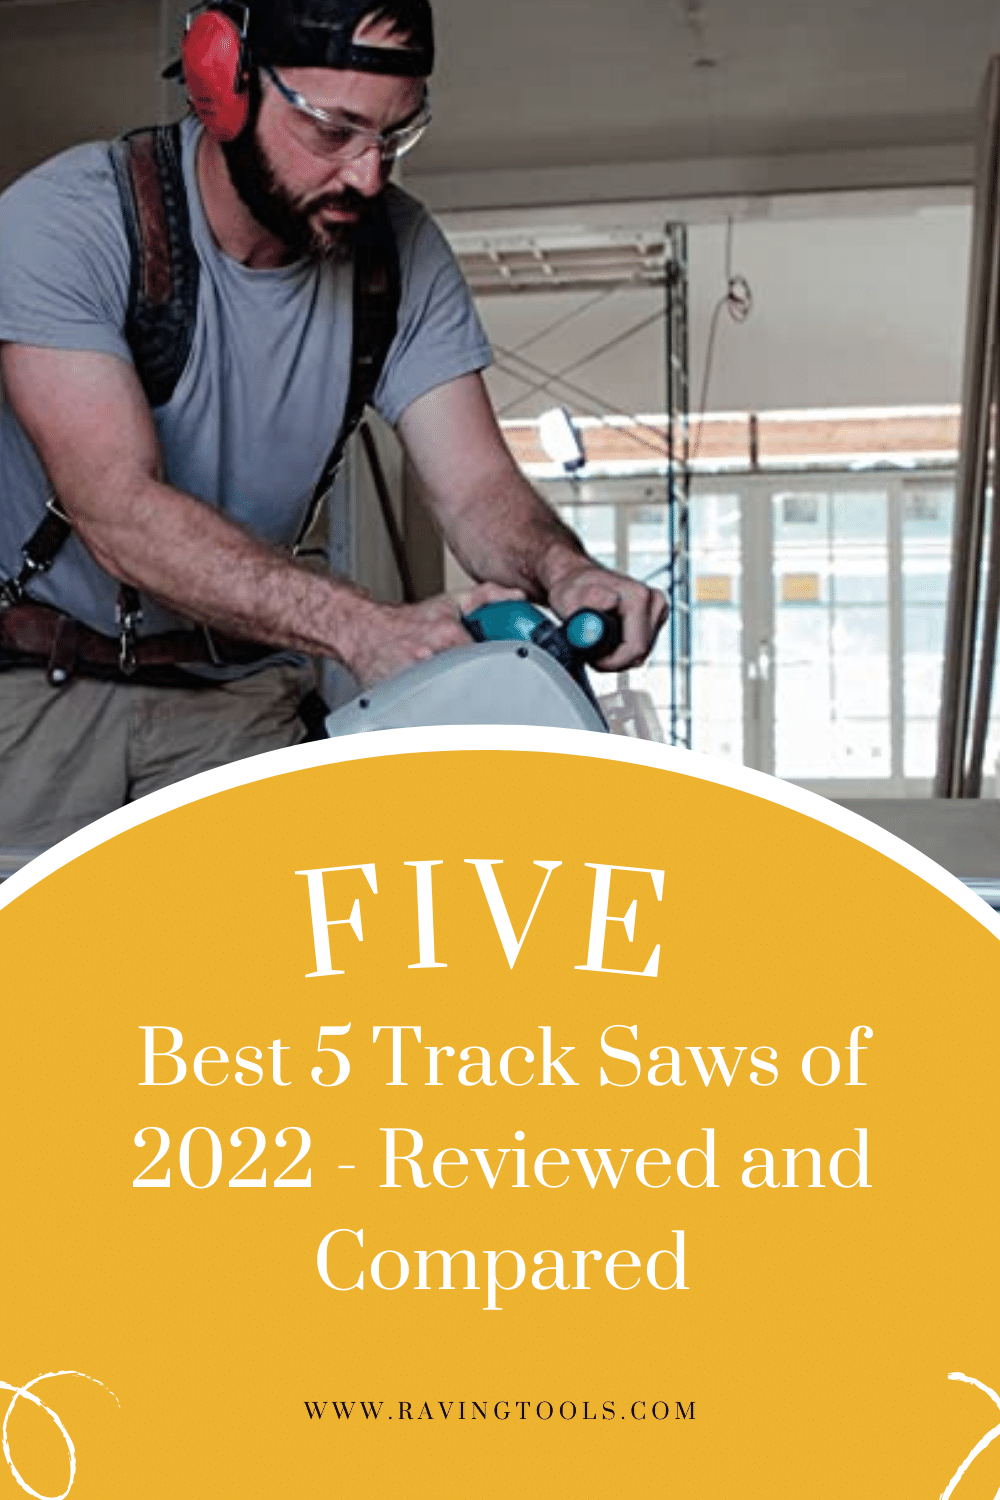 Best 5 Track Saws of 2022 - Reviewed and Compared